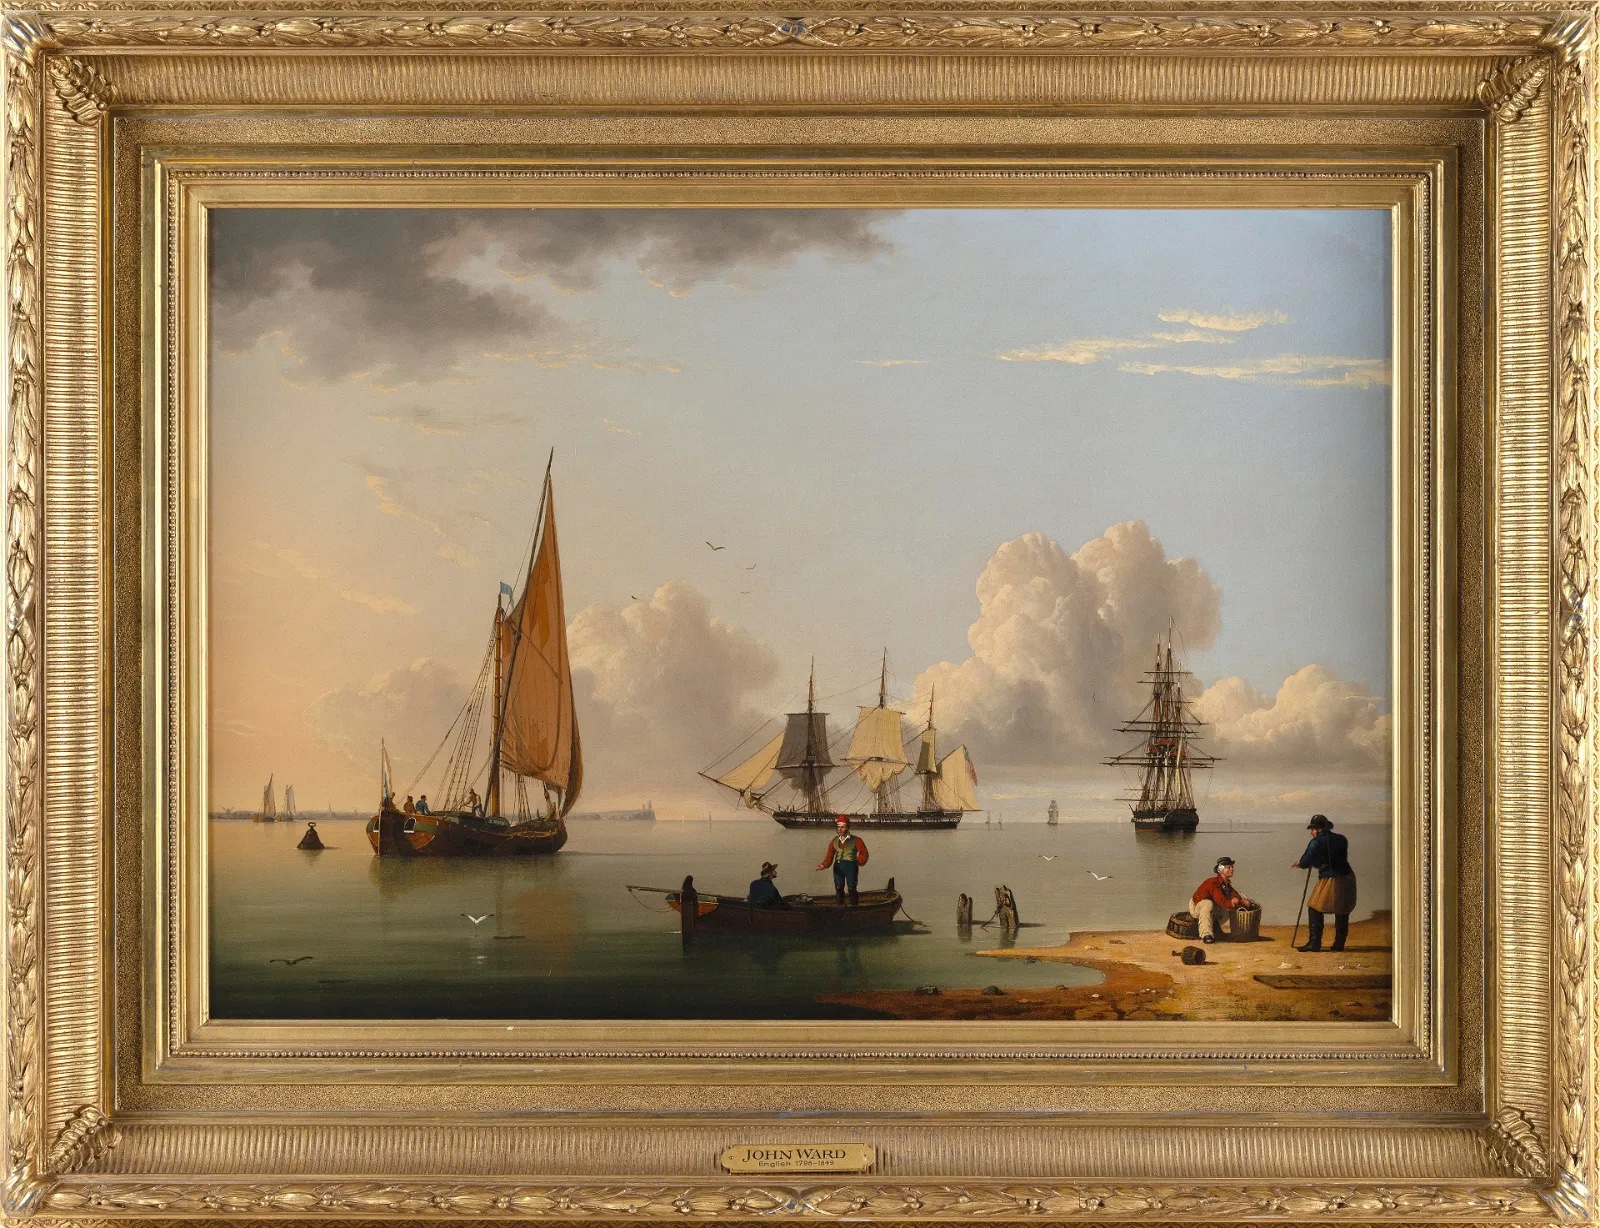 John Ward of Hull, 'A Frigate Offshore,' estimated at $30,000-$40,000 at Eldred's.